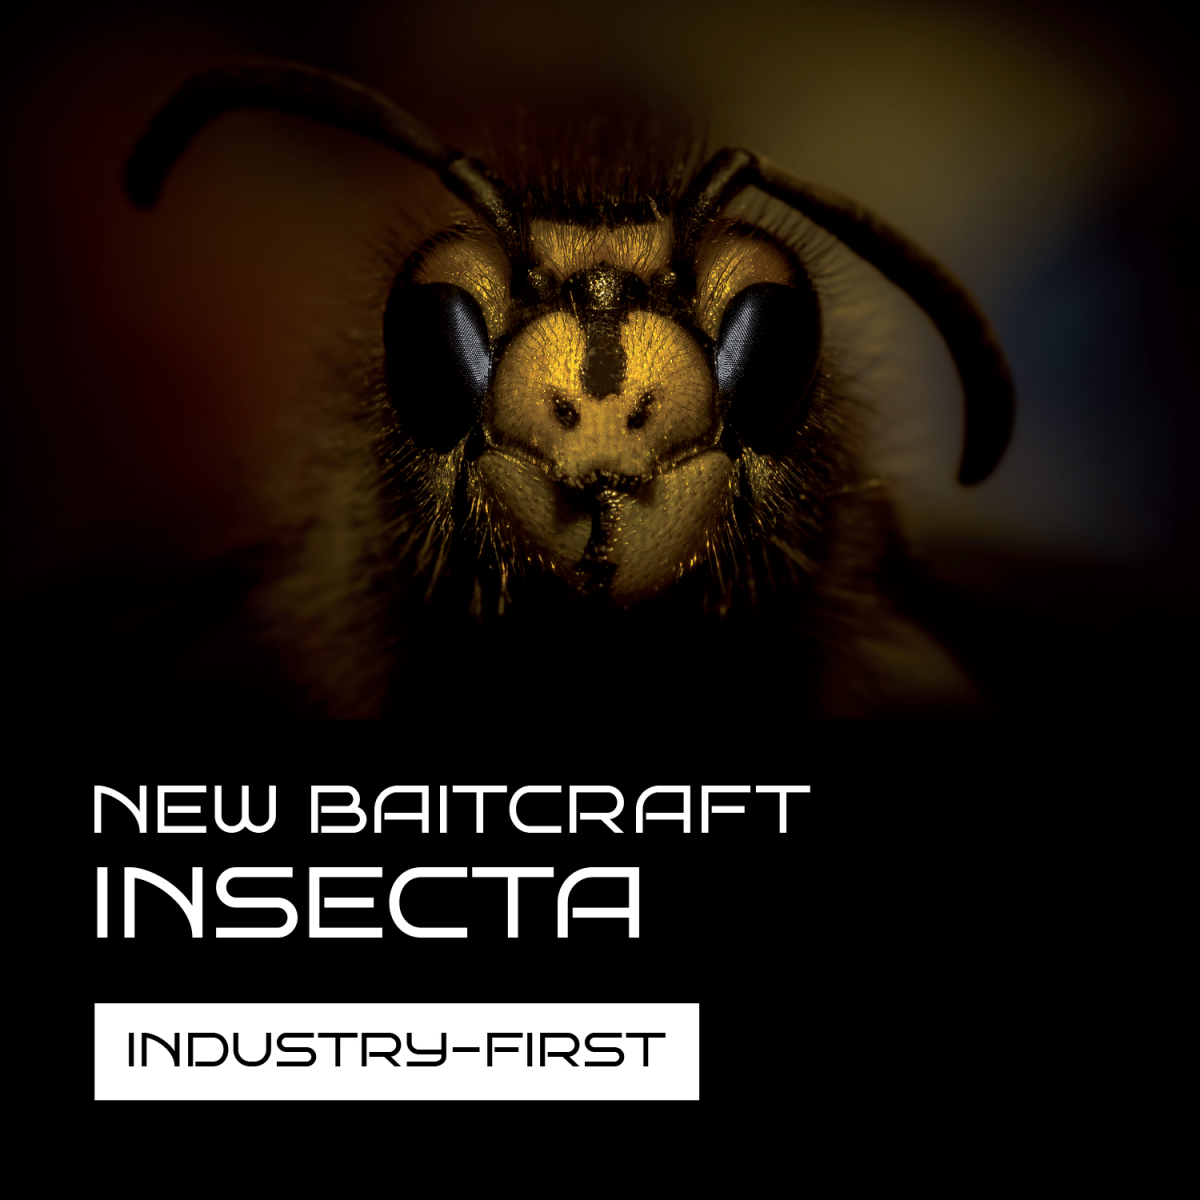 NEW INSECTA - NOW AVAILABLE